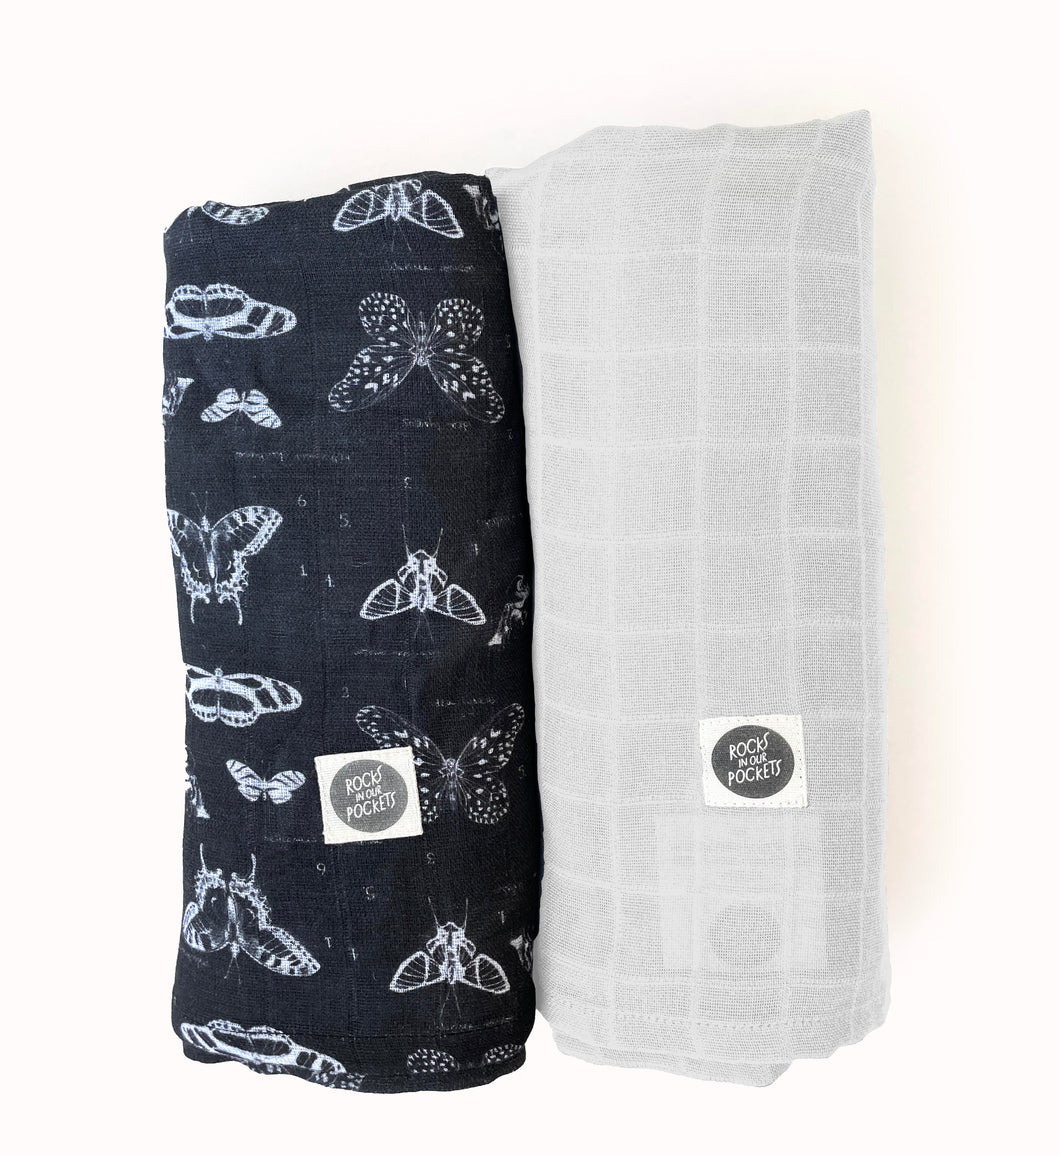 black and white organic baby swaddle blankets